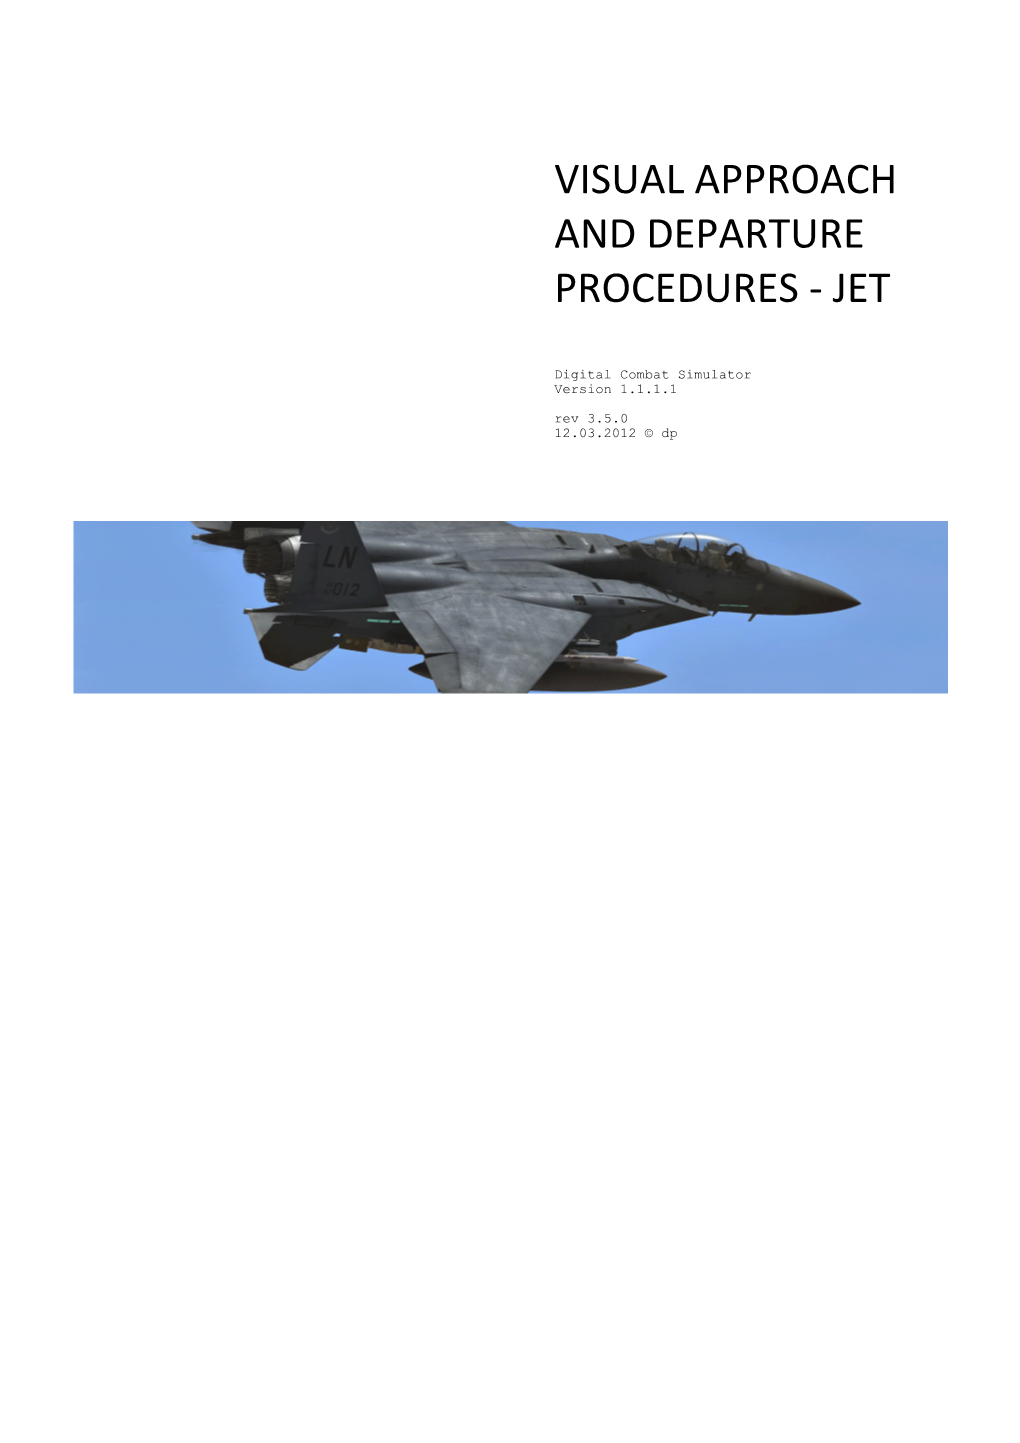 Visual Approach and Departure Procedures - Jet